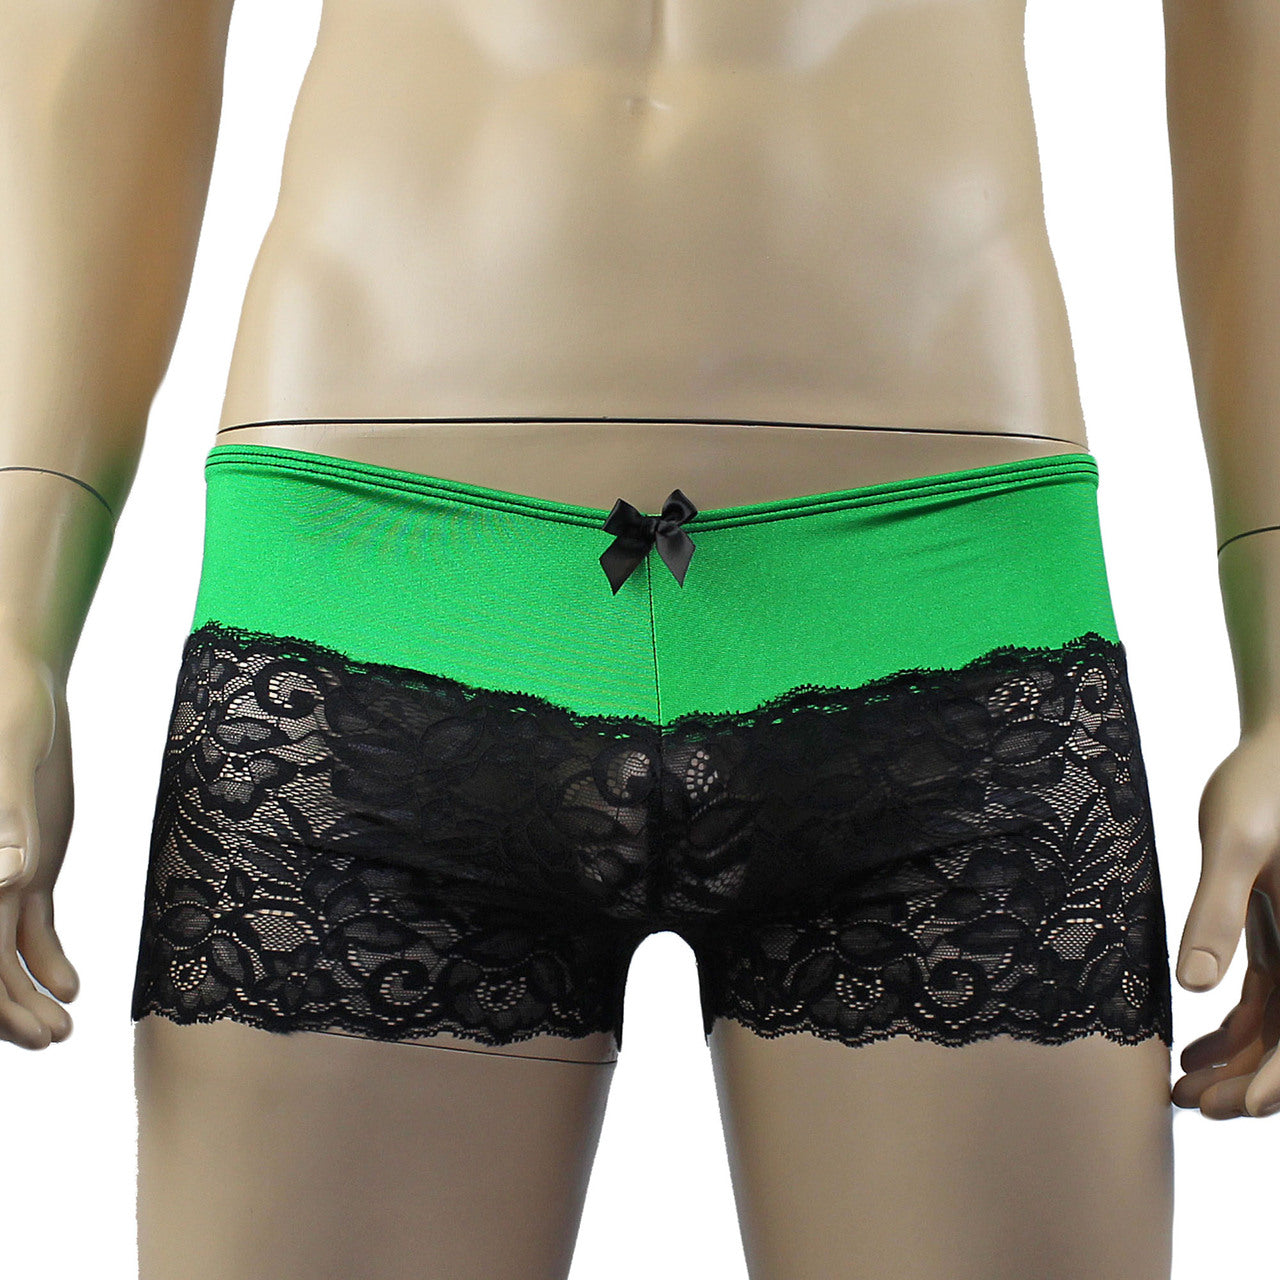 Mens Risque Boxer Briefs Green and Black Lace